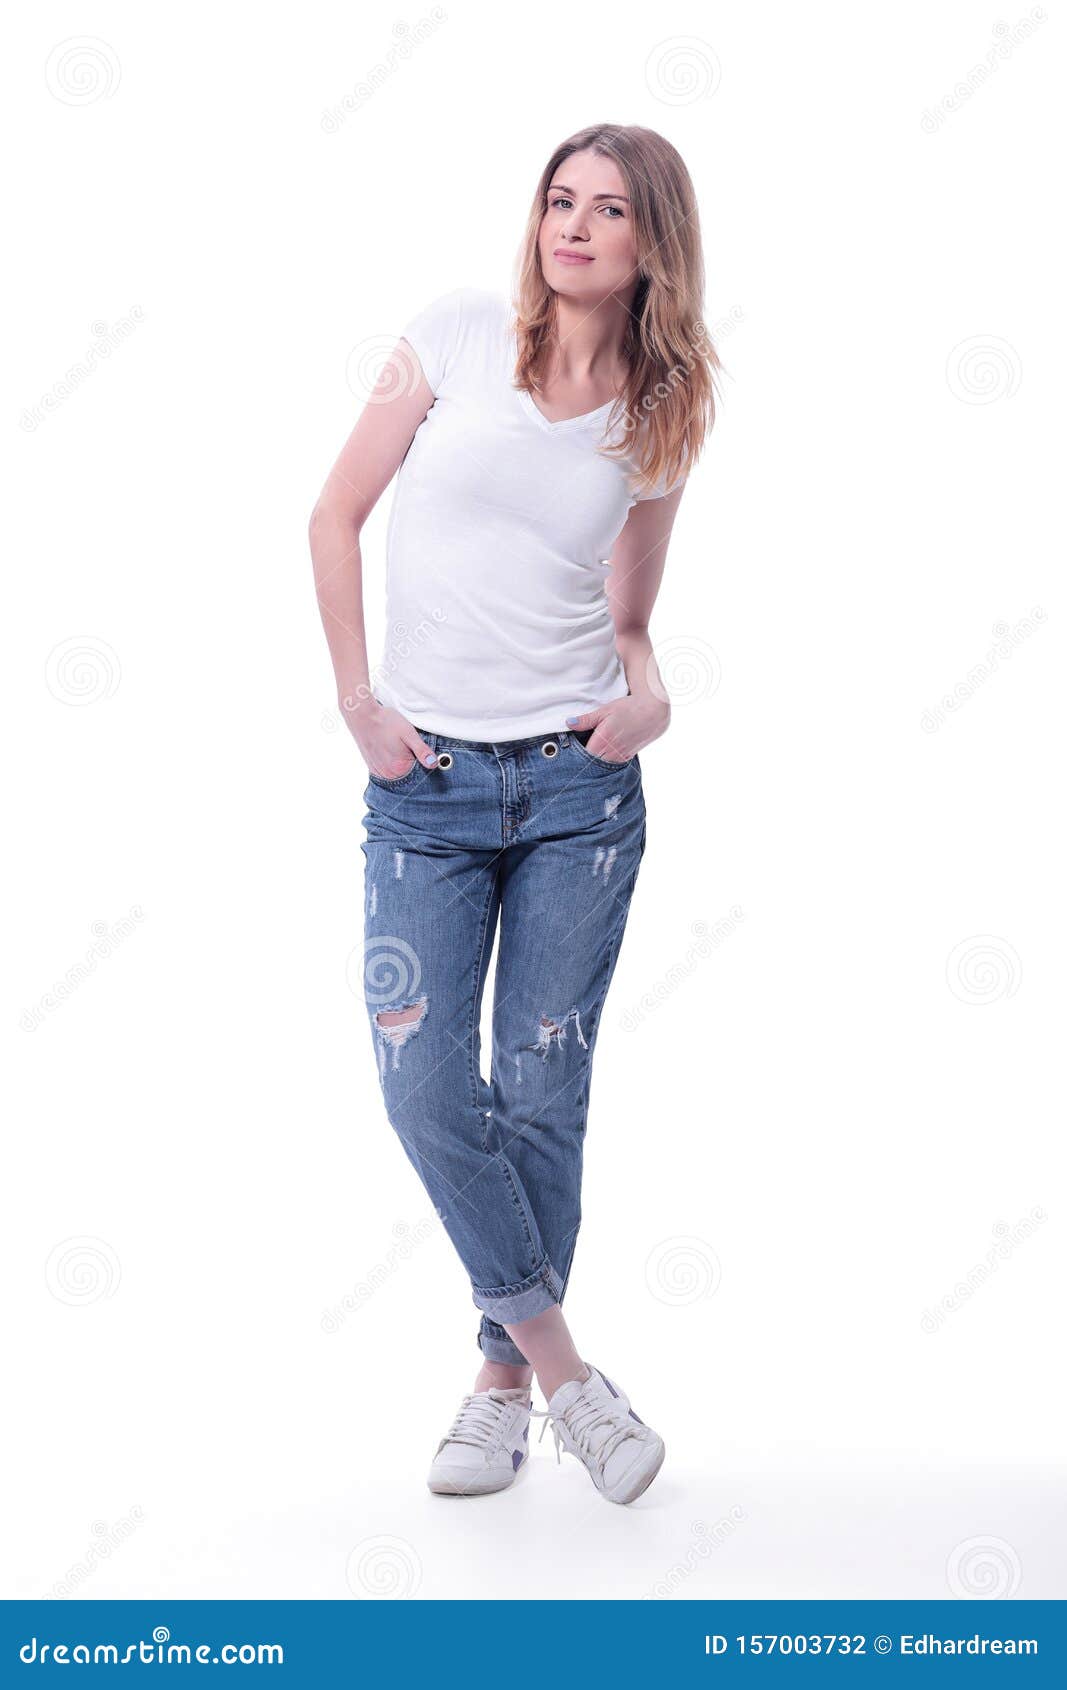 Pretty Girl With Hairstyle In Fashion White Tshirt And Blue Vintage Jeans  Sits In Studio Stock Photo  Download Image Now  iStock